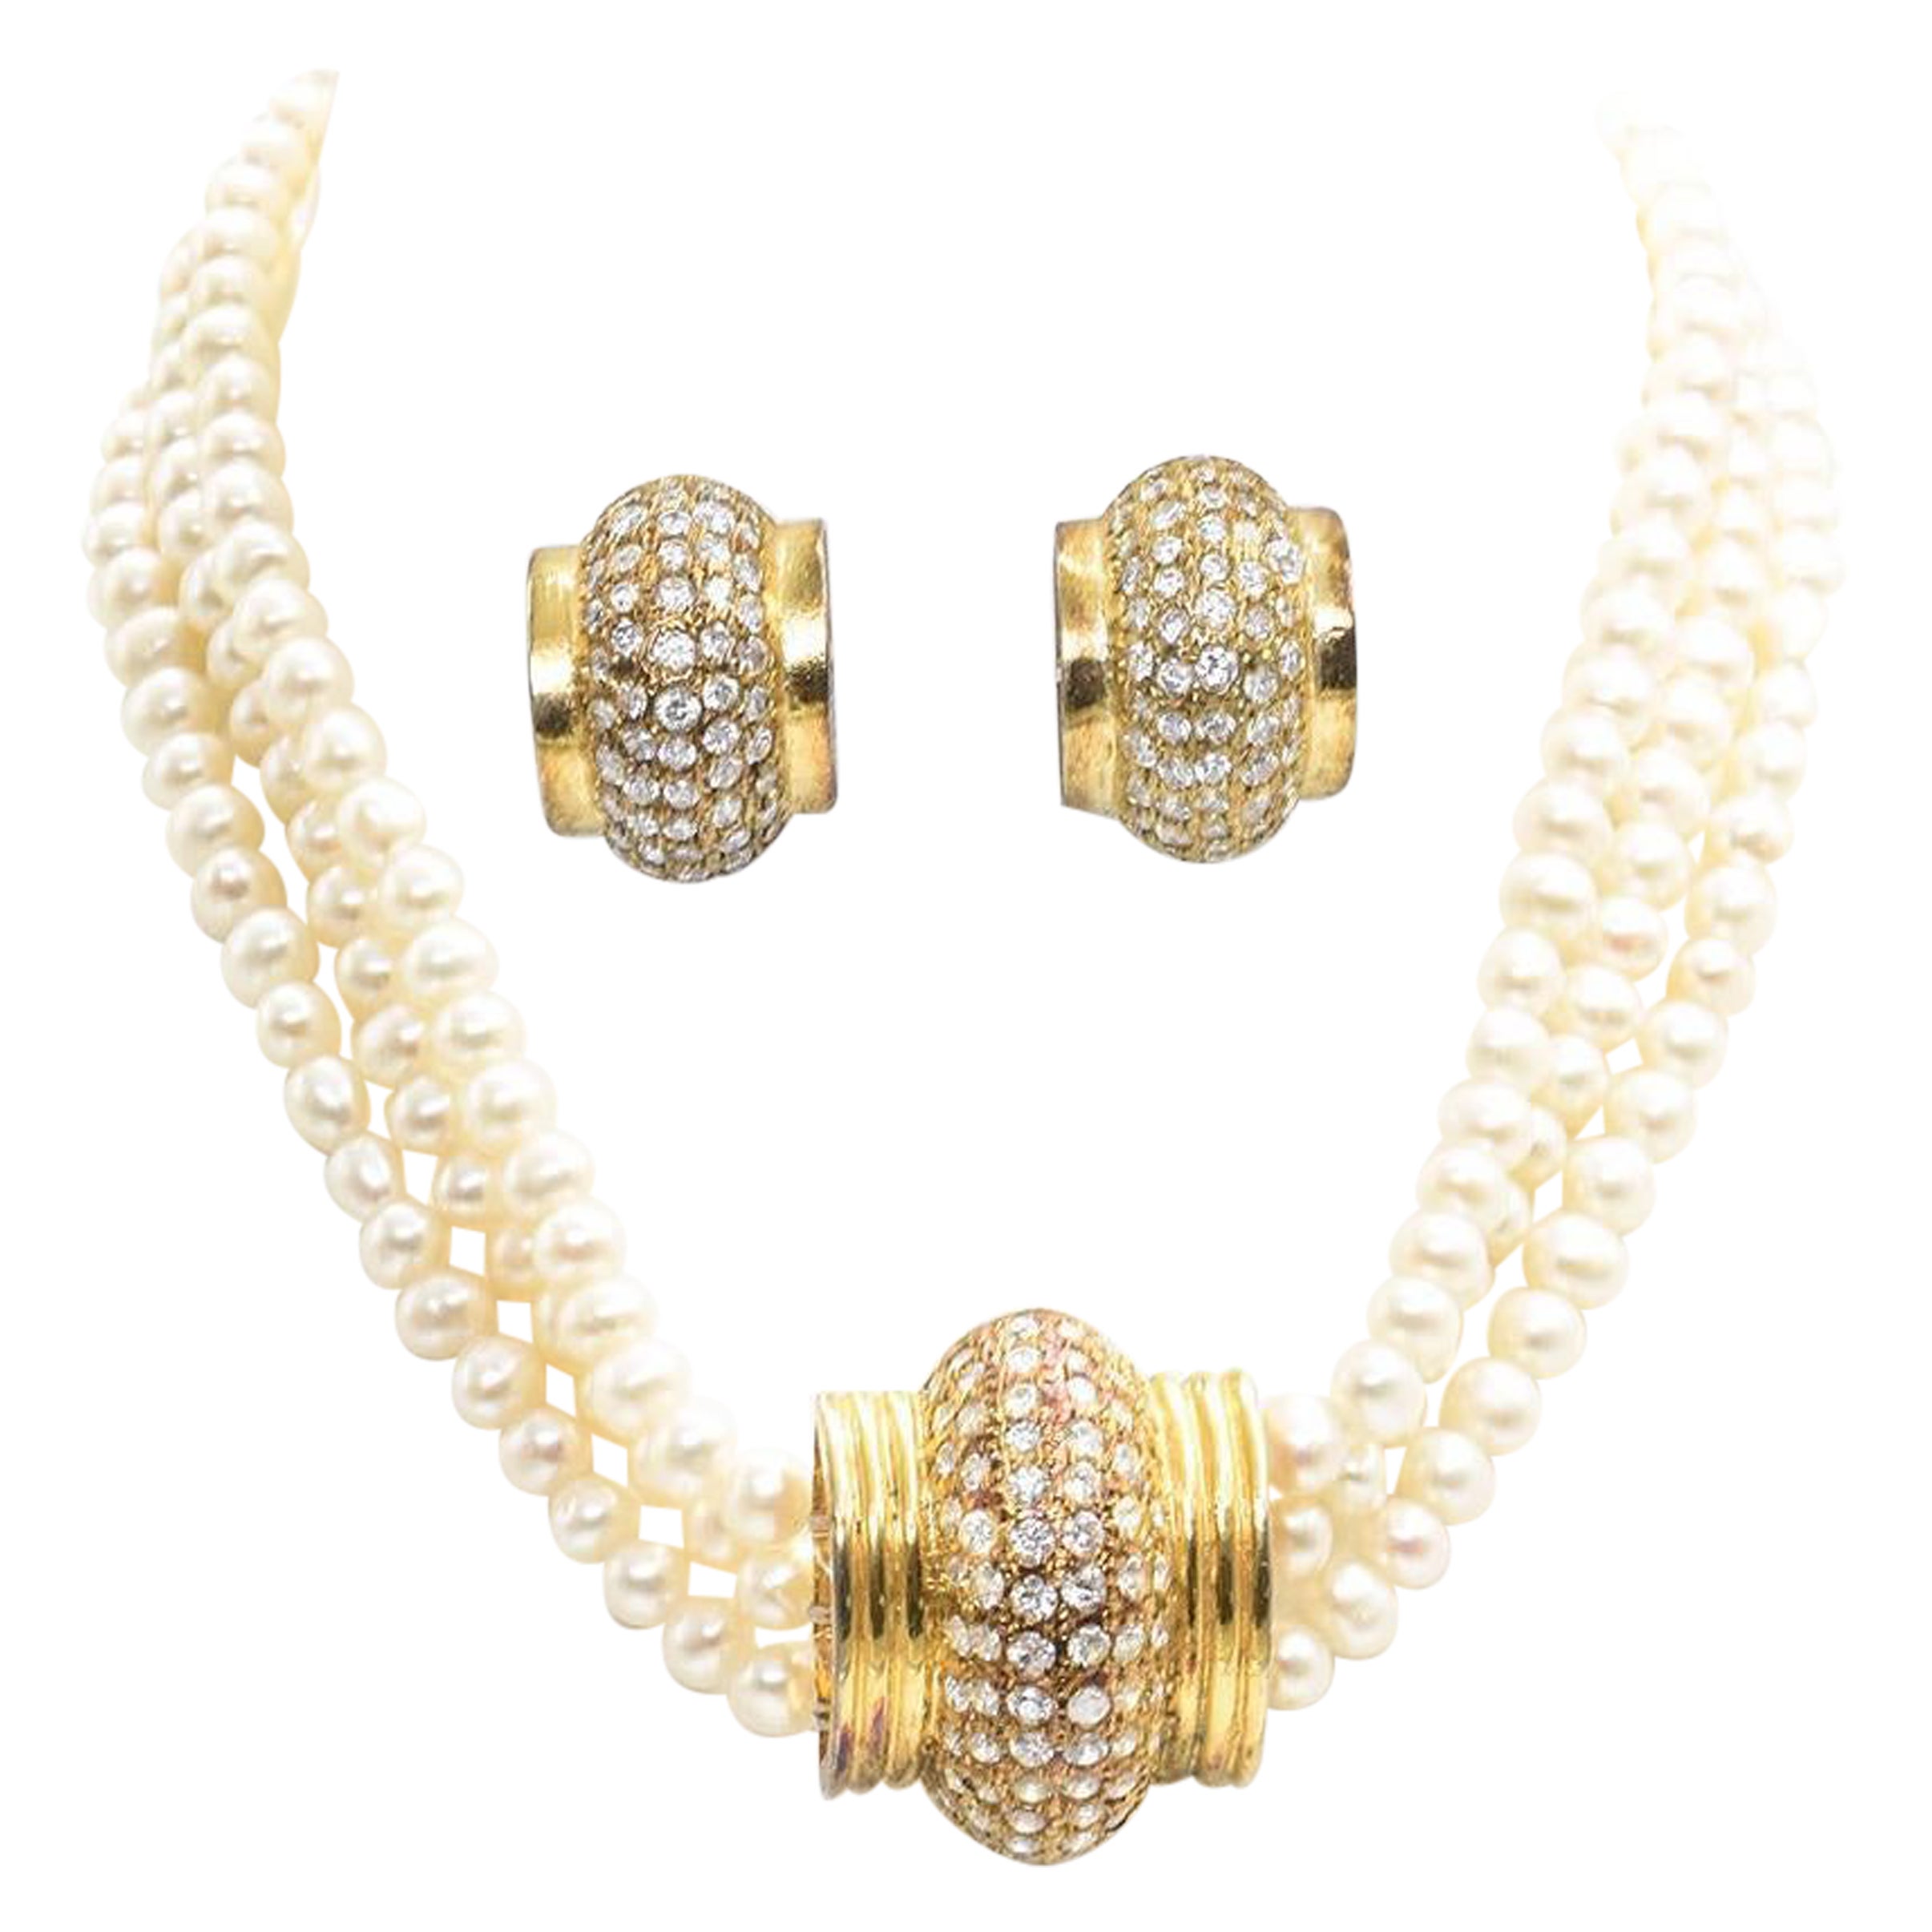 Triple Strand Pearl Rhinestone Gilt Gold Choker Collar Necklace and Earrings Set For Sale